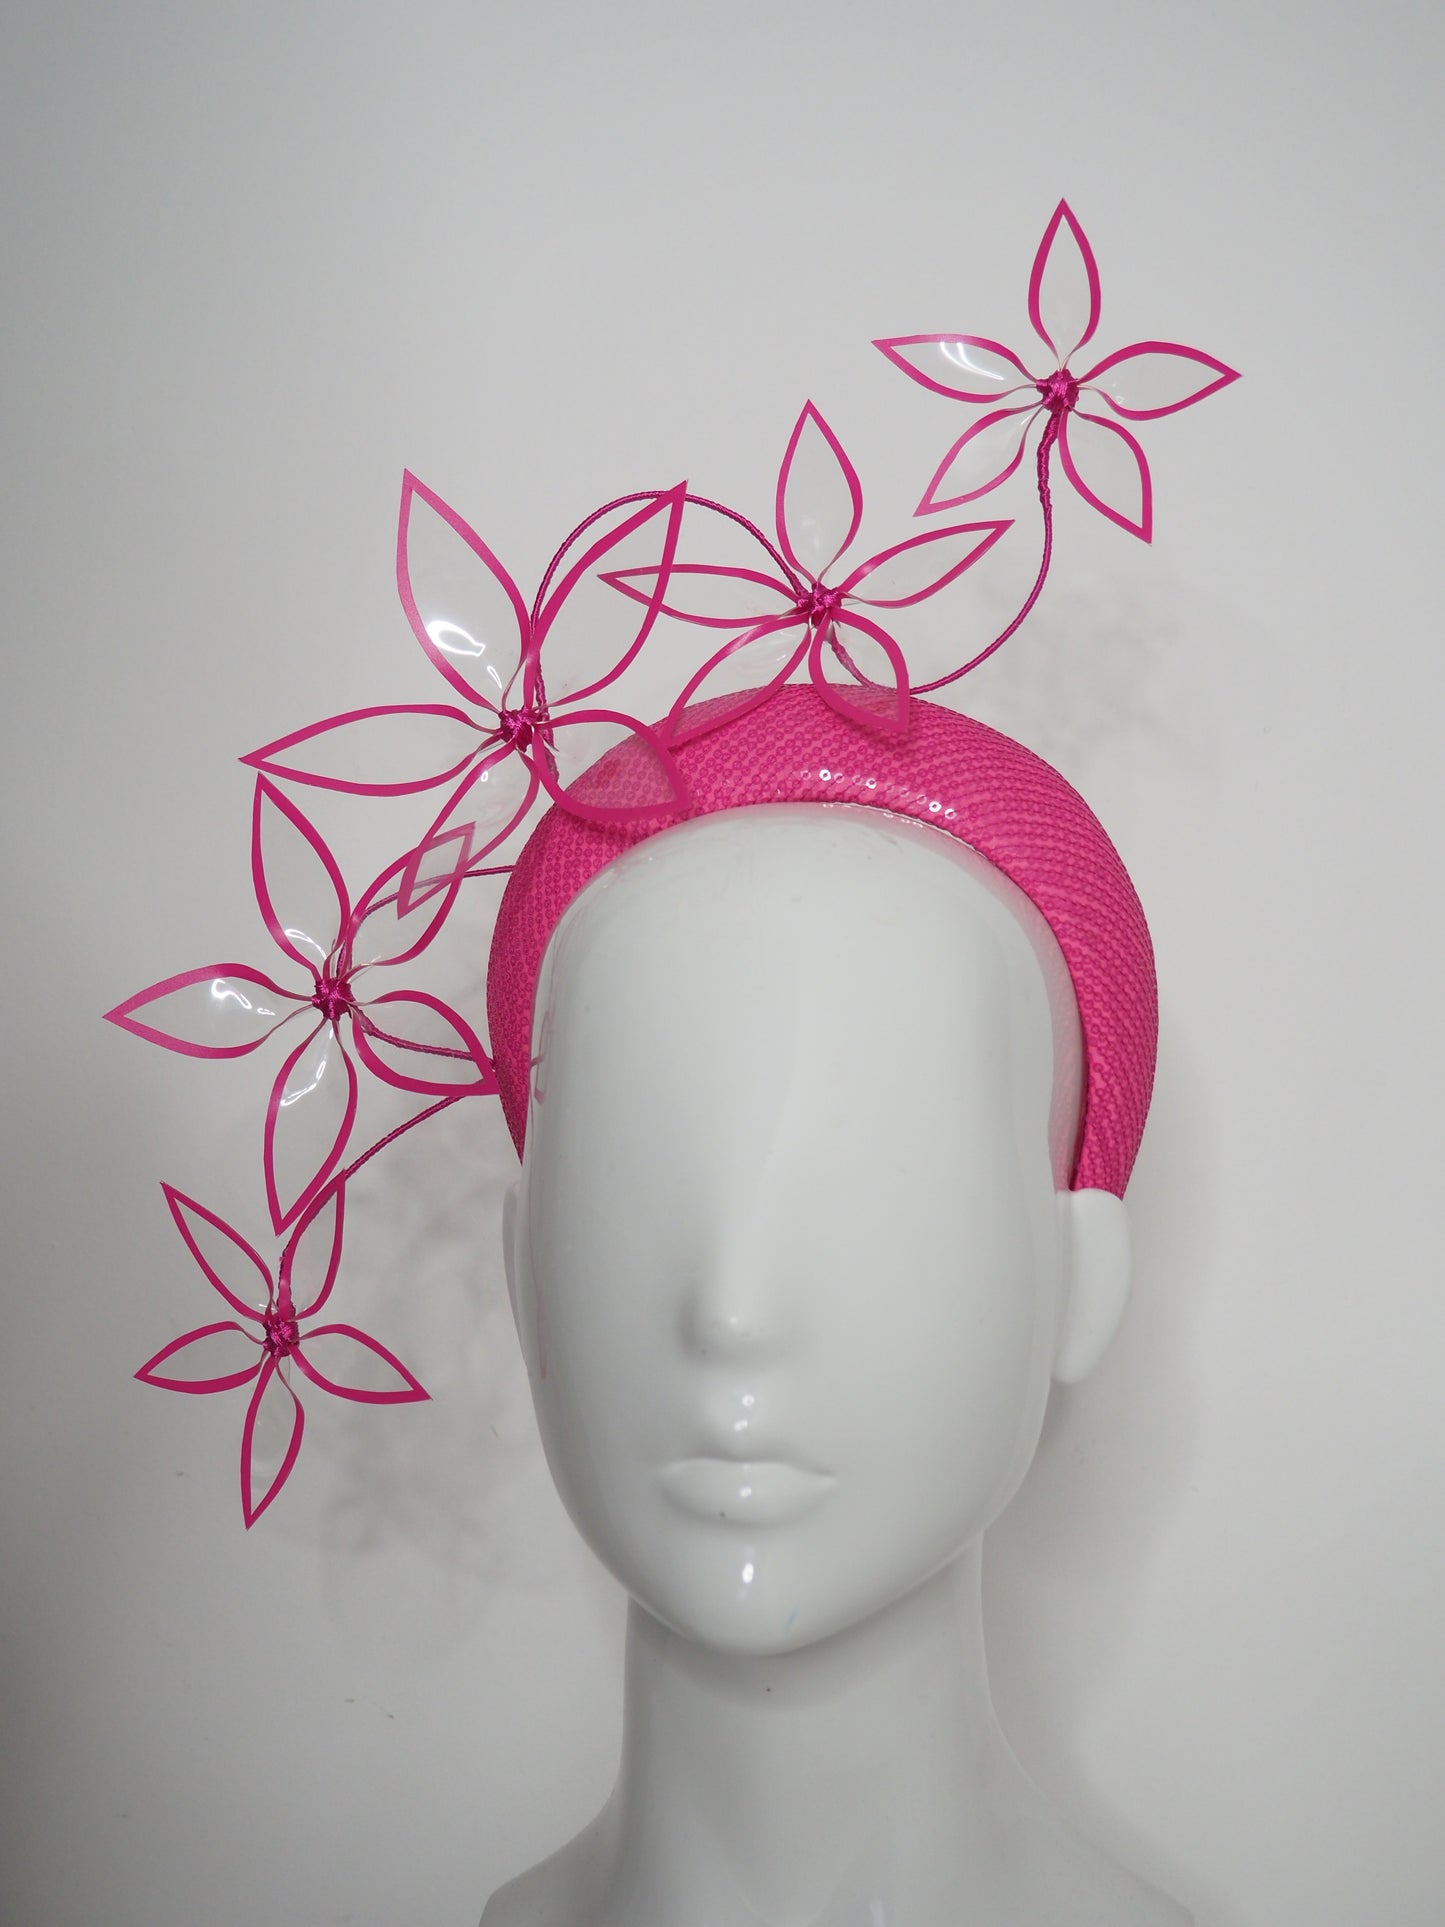 Hot Pink Pop - Hand Dyed Hot Pink sequin 3d headband with dancing crystoform flowers